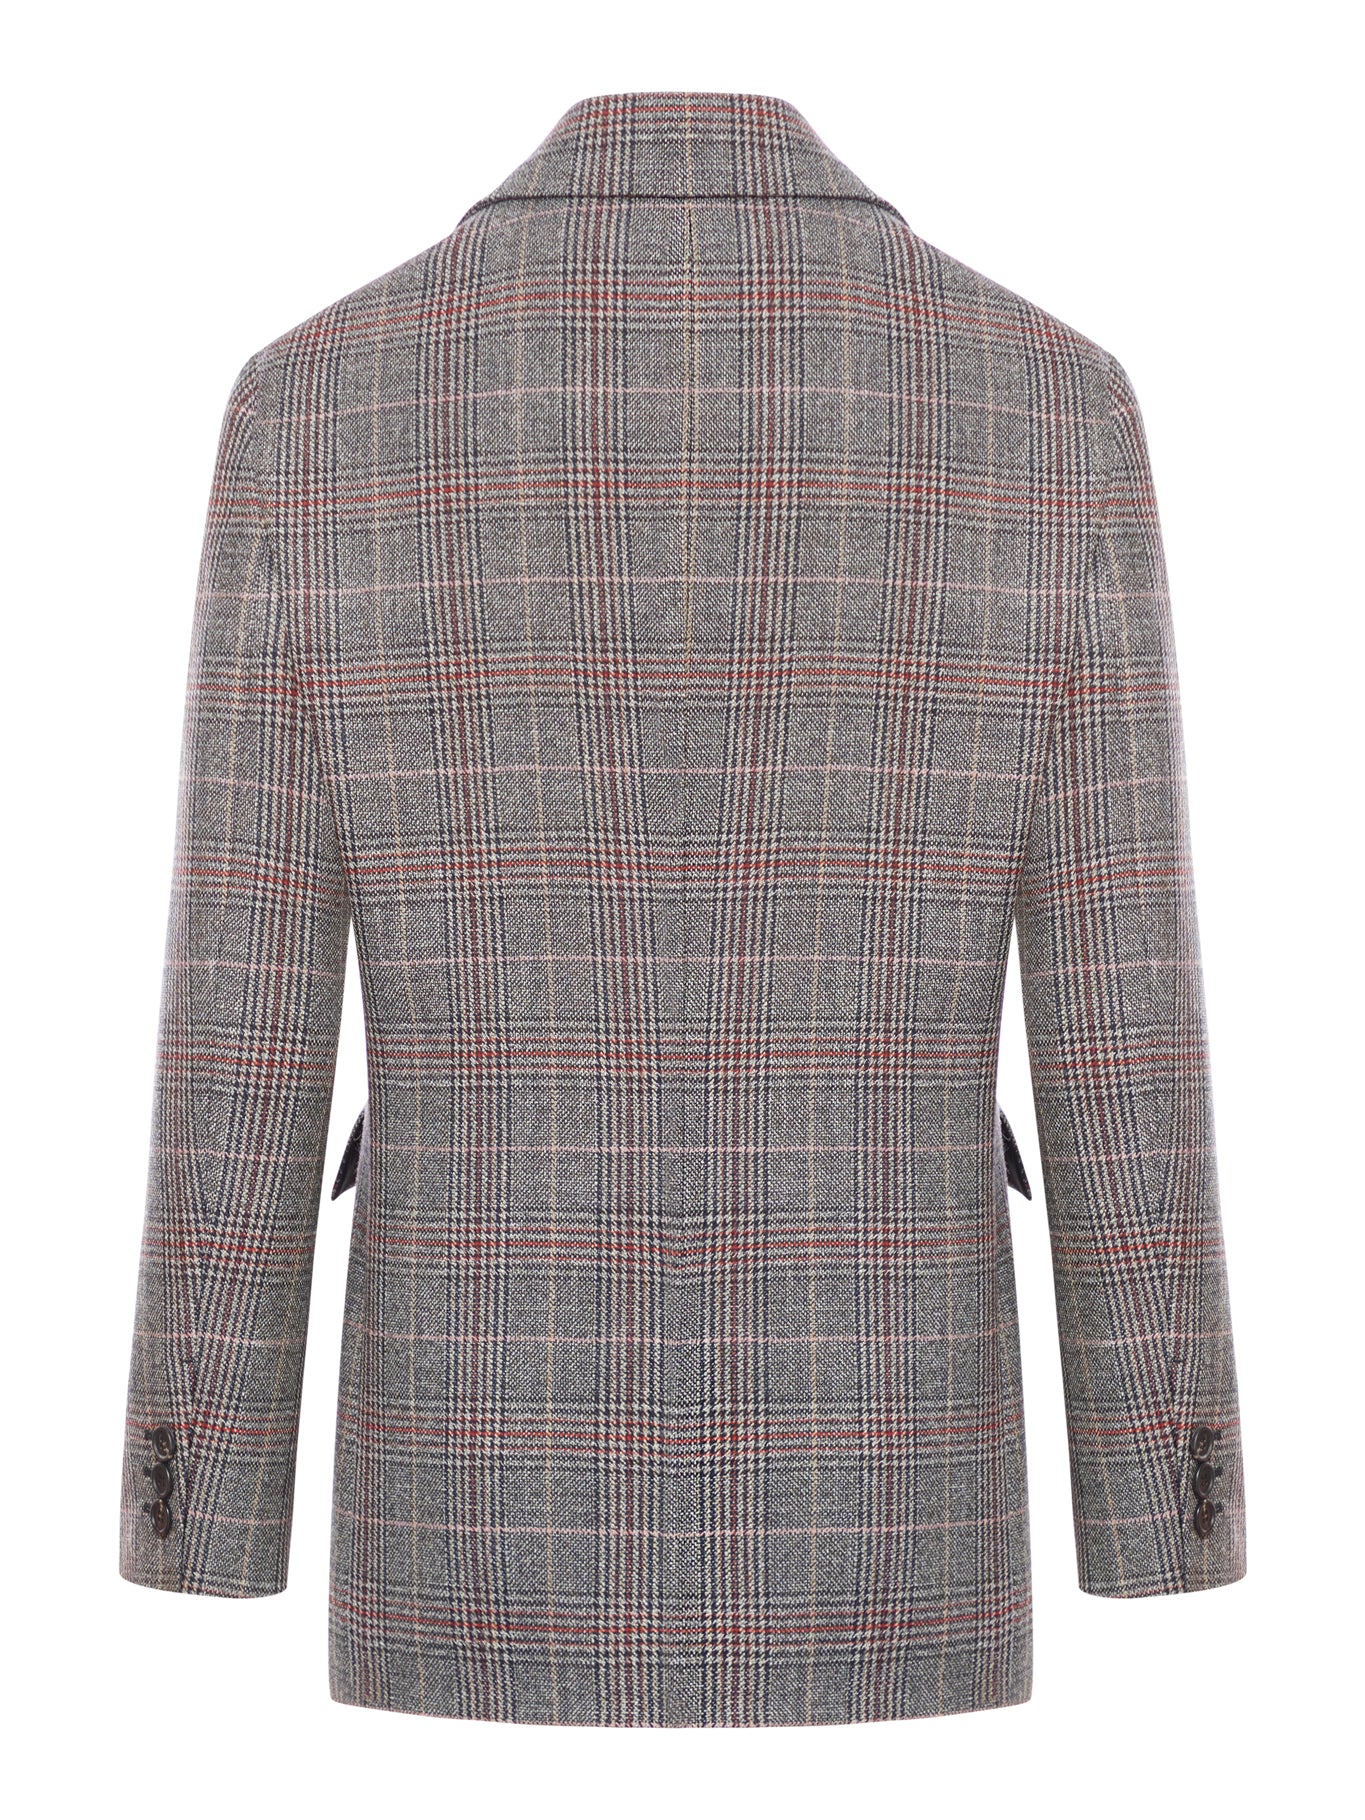 Single-breasted jacket in checked fabric